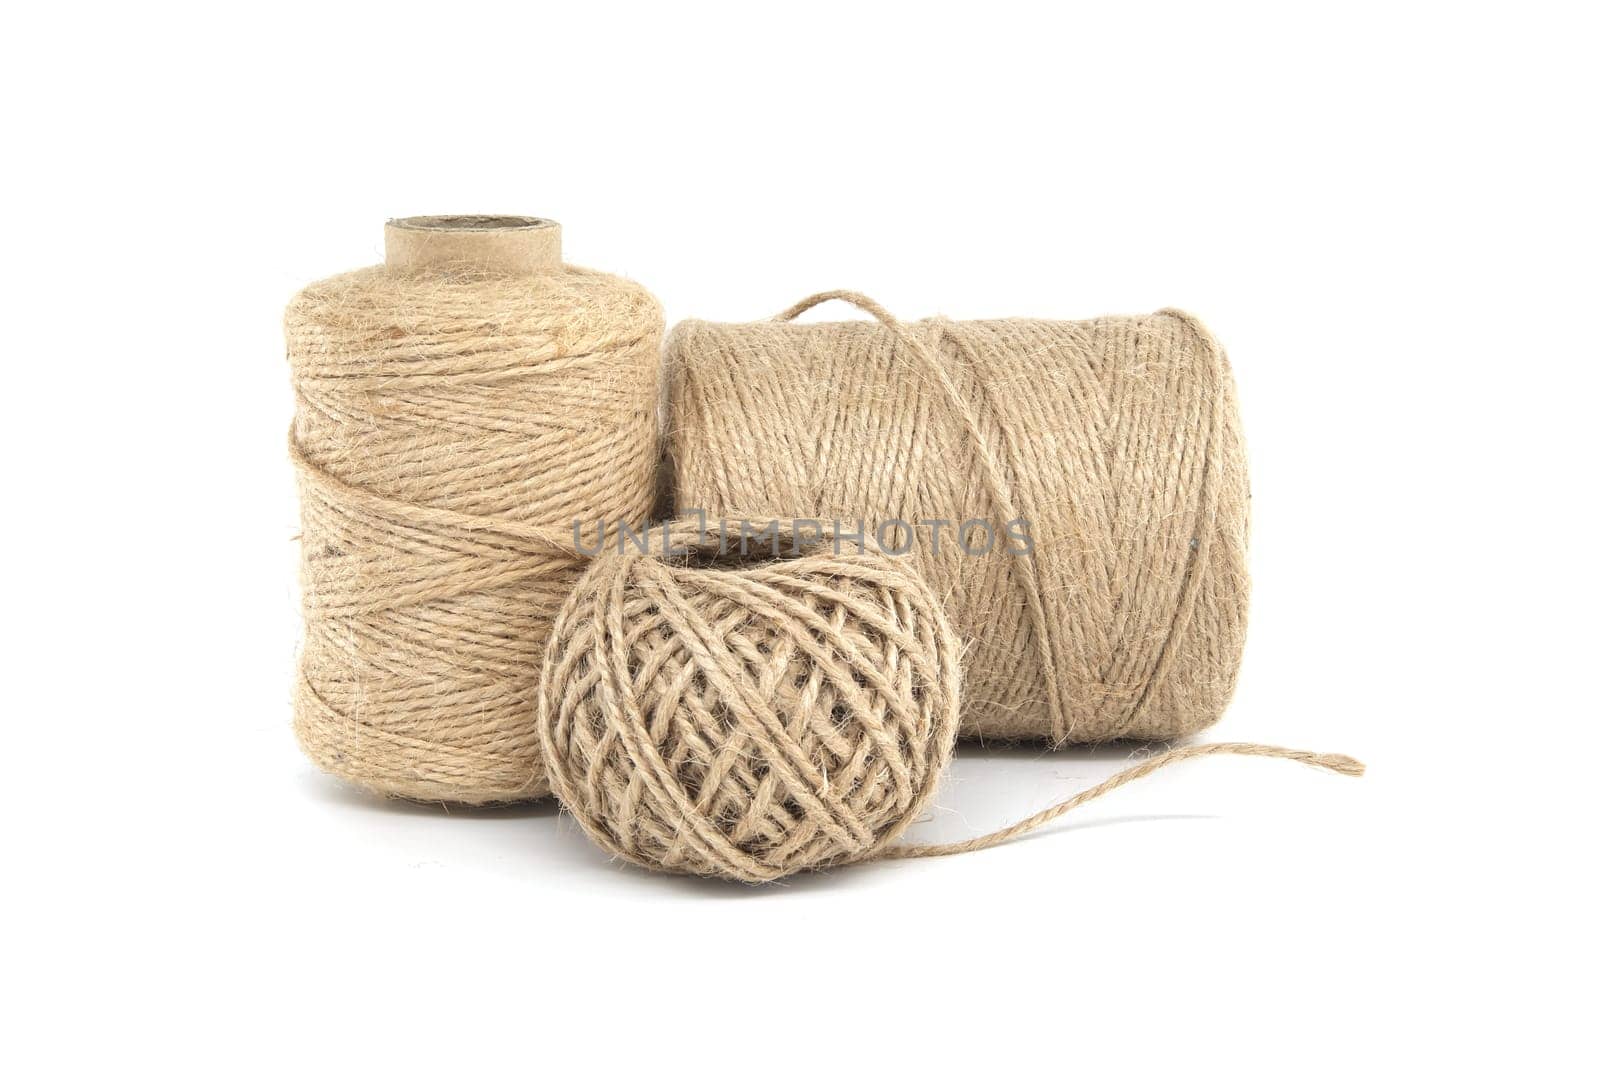 Three spools of jute twine isolated on white background, each varying in size, made from natural jute materials